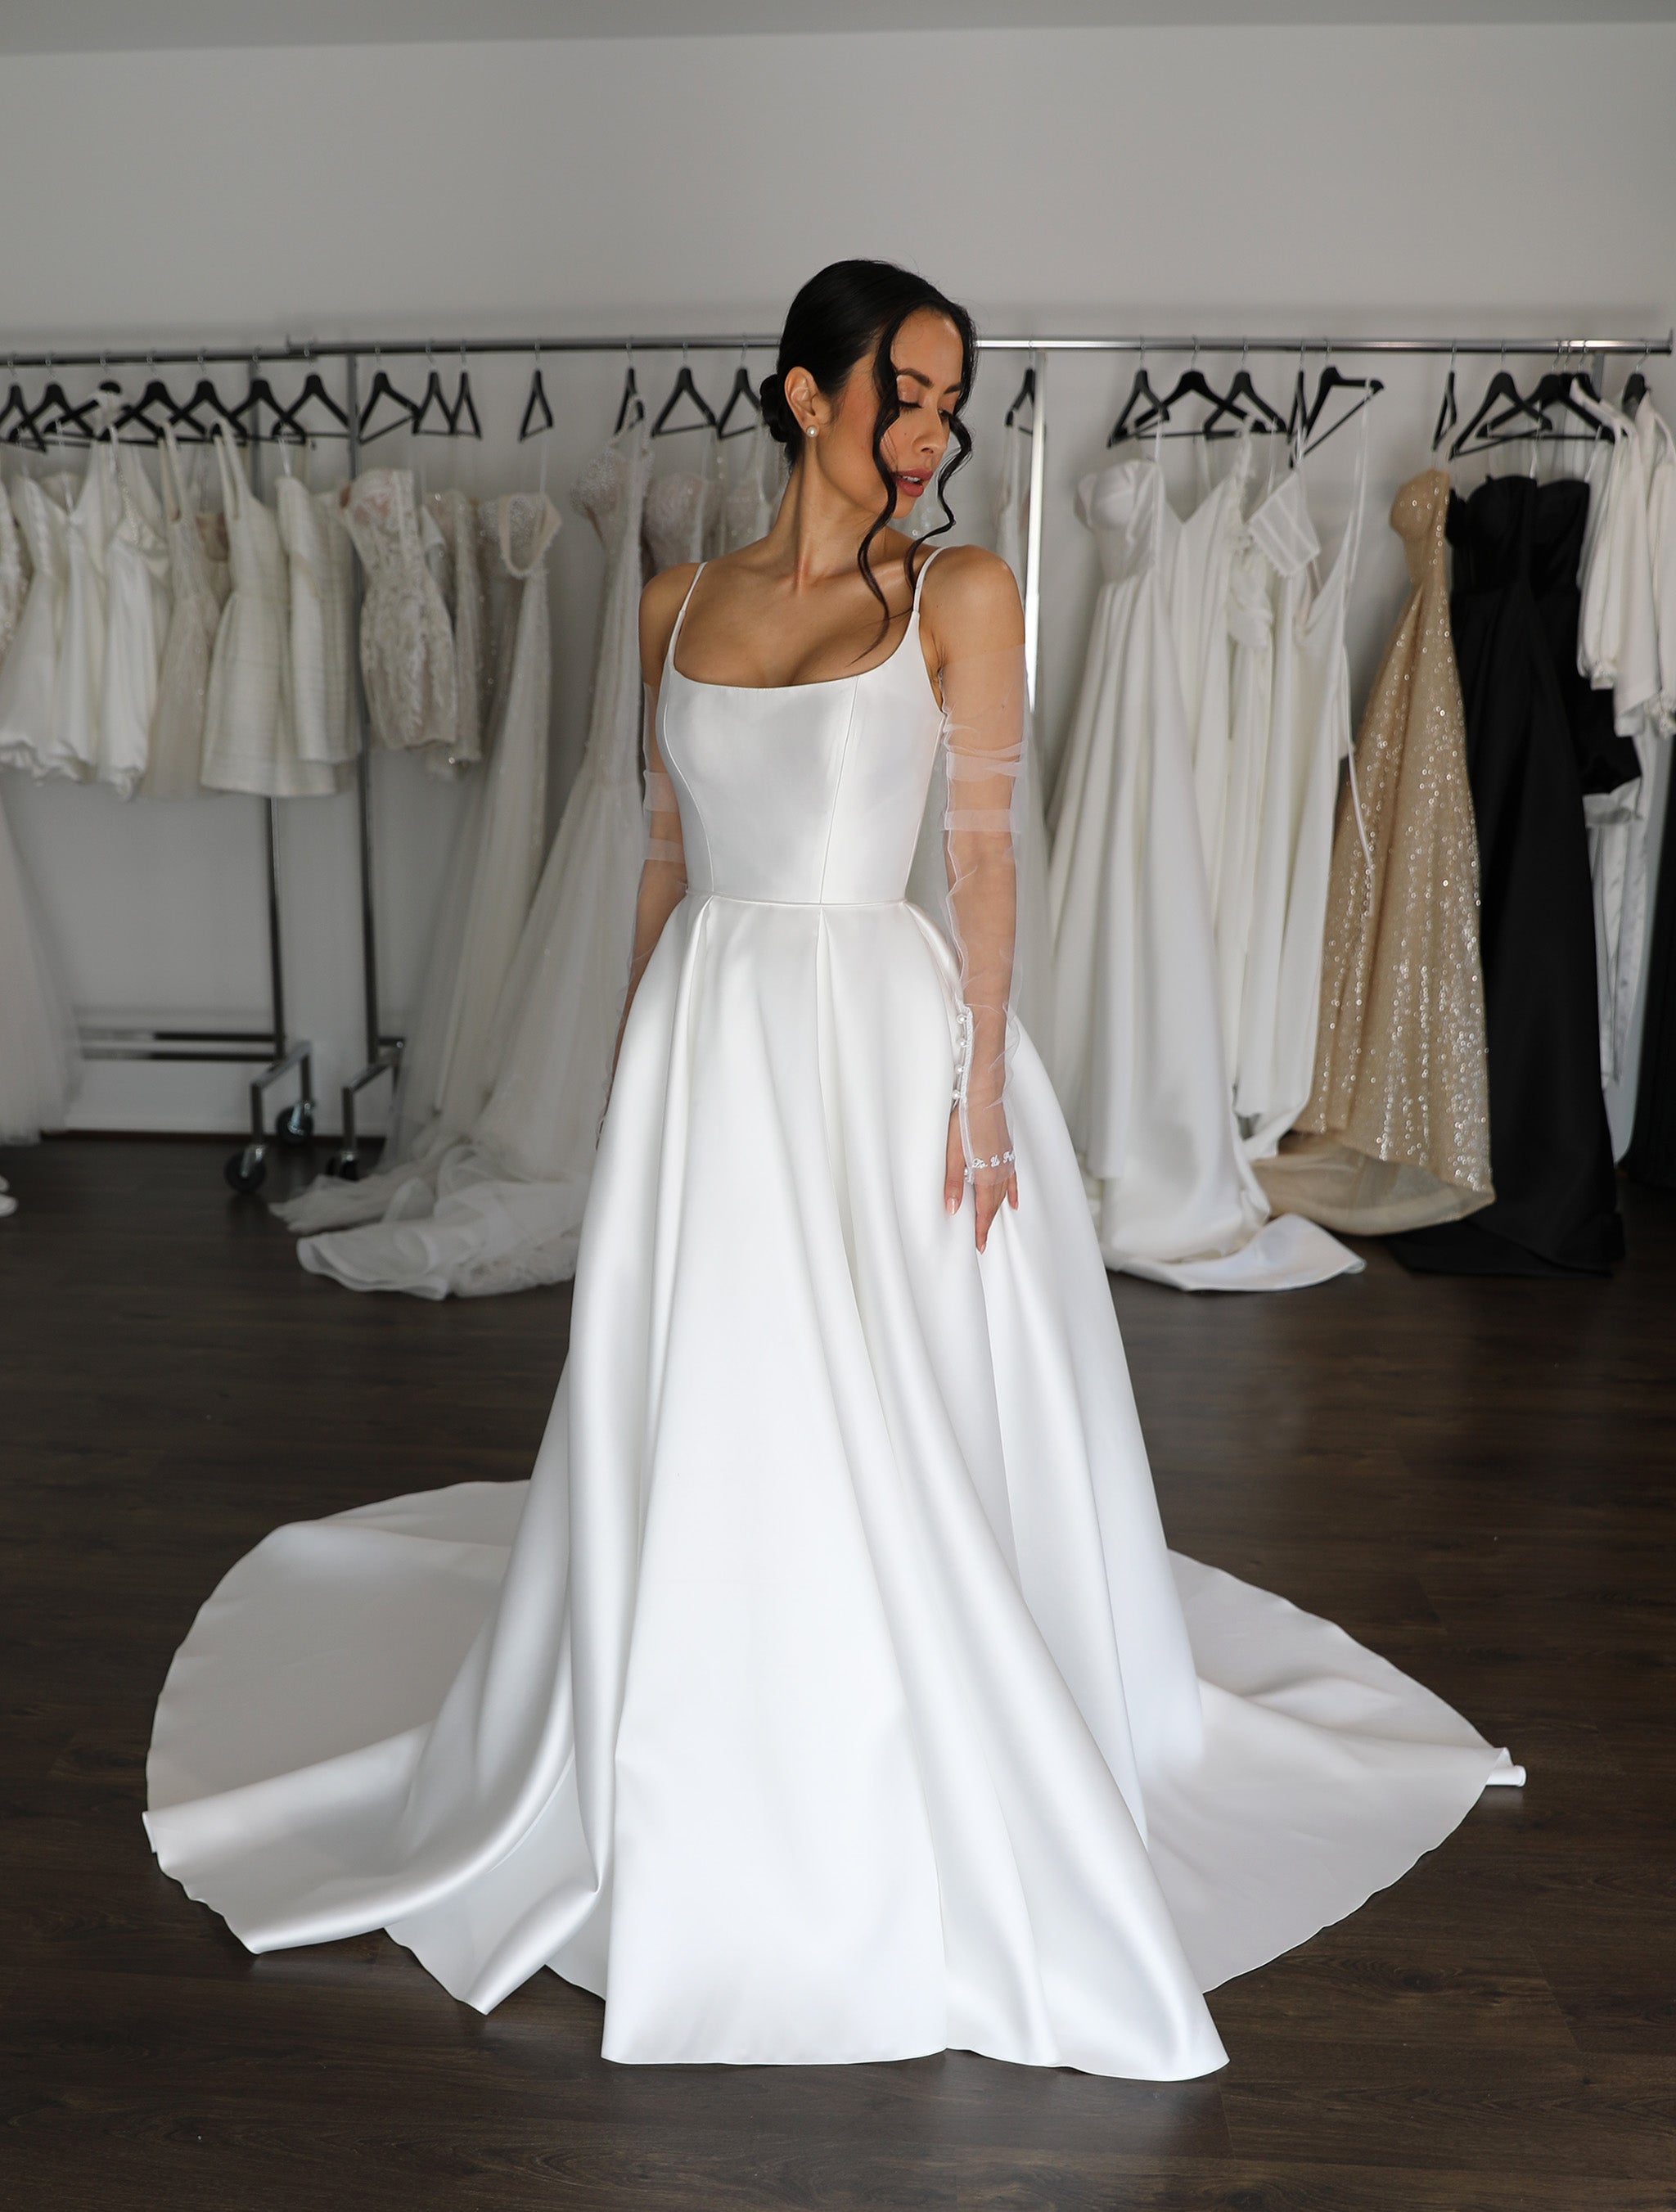 white mikado wedding dress with U-neckline and dramatic train with long tulle gloves